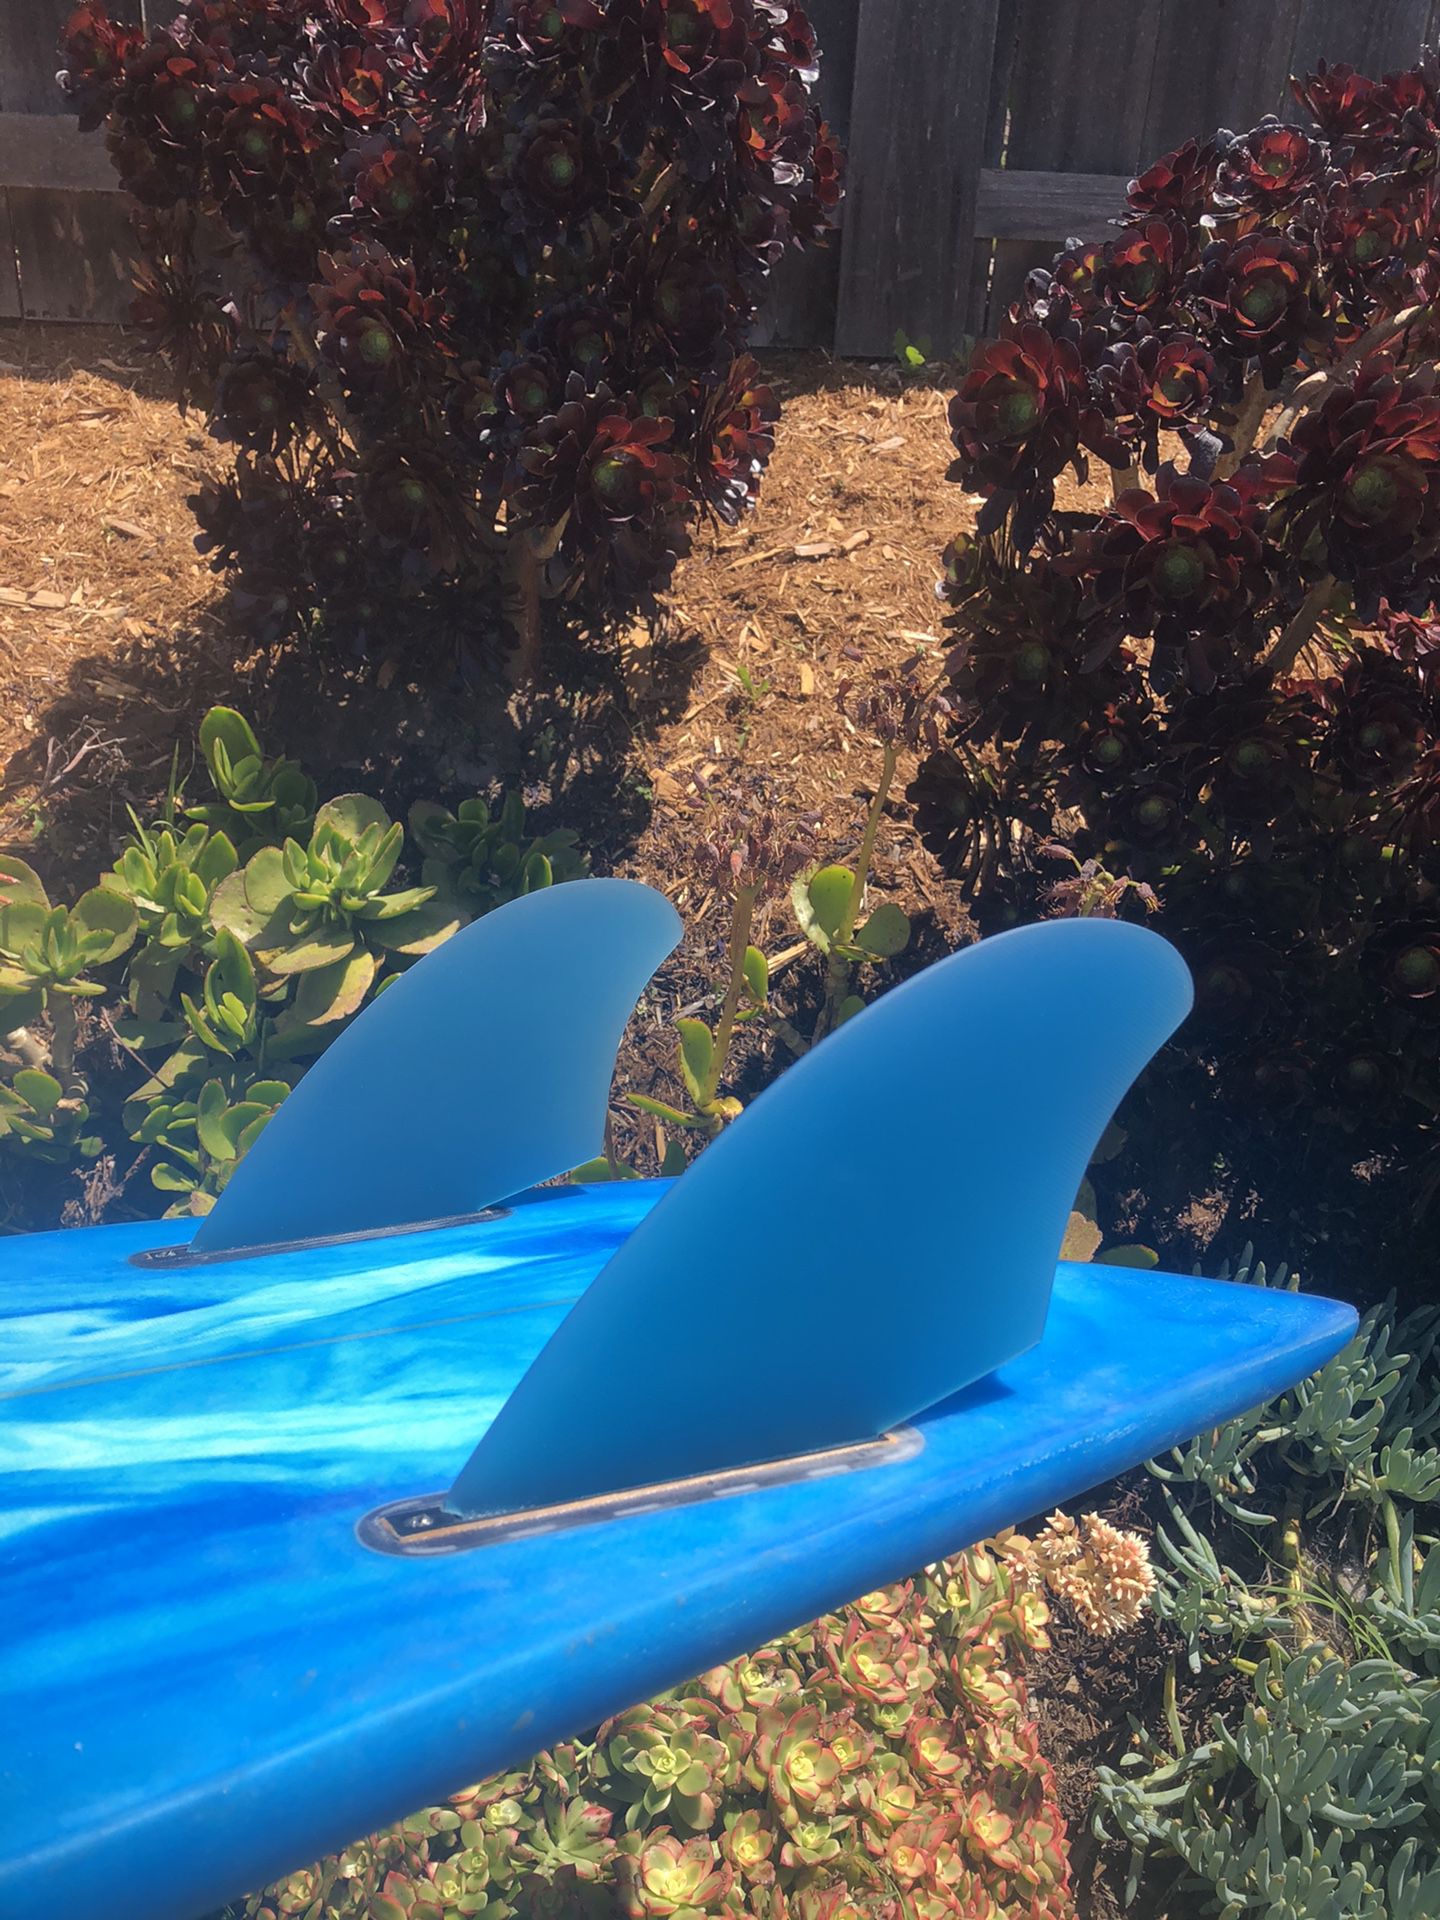 Brand new twin keel fins, futures base